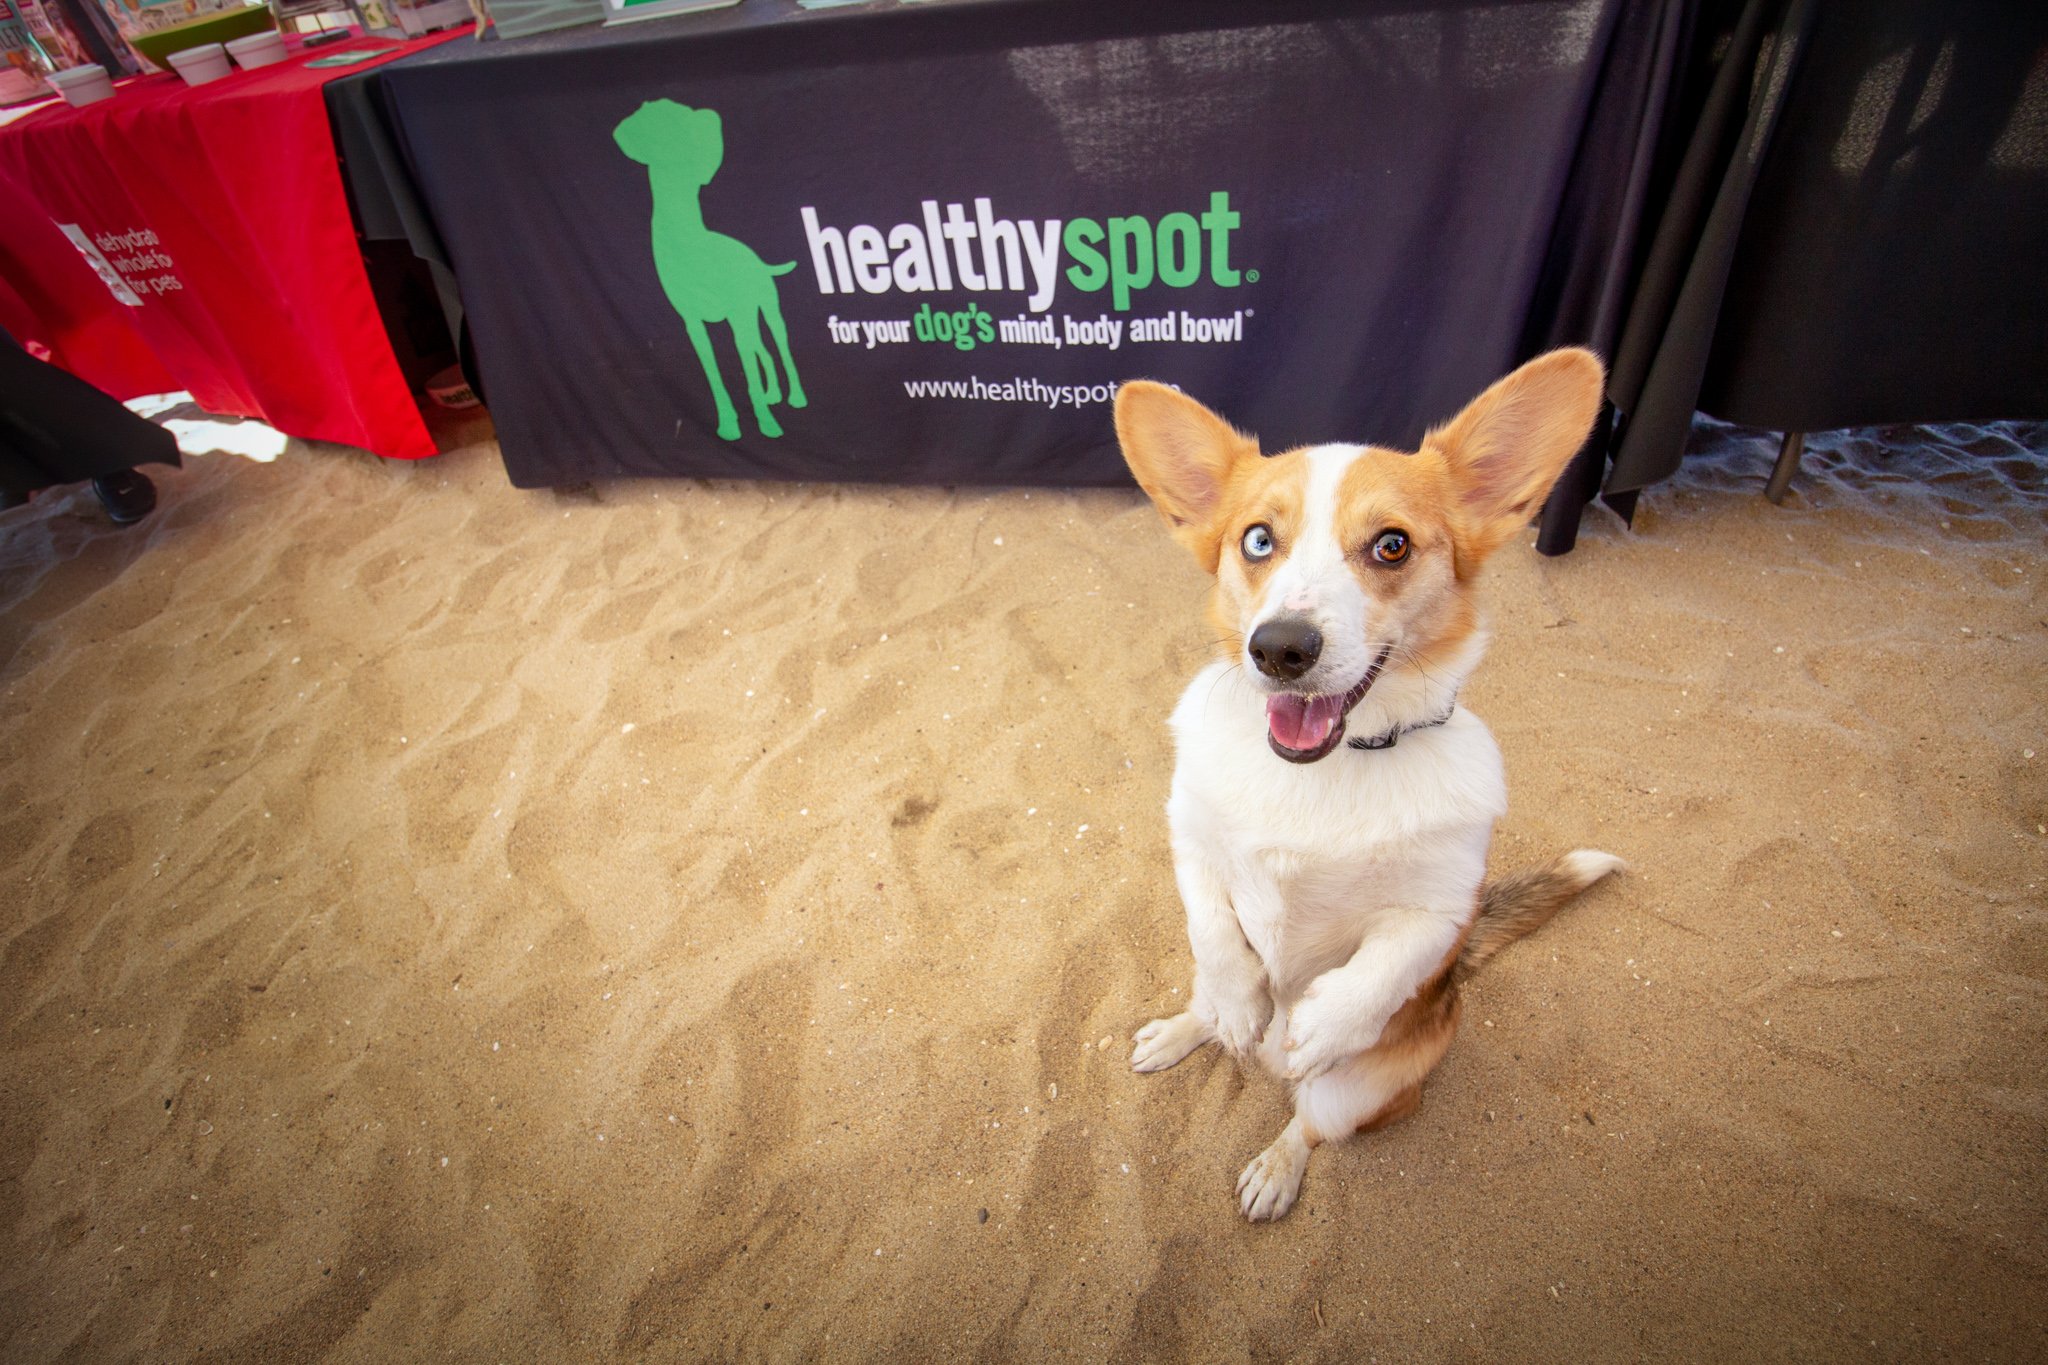 Orange County Pet and Dog Photography - by Steamer Lee - Corgi Beach Day Spring 2019 - Southern Caliornia 44 (1).JPG